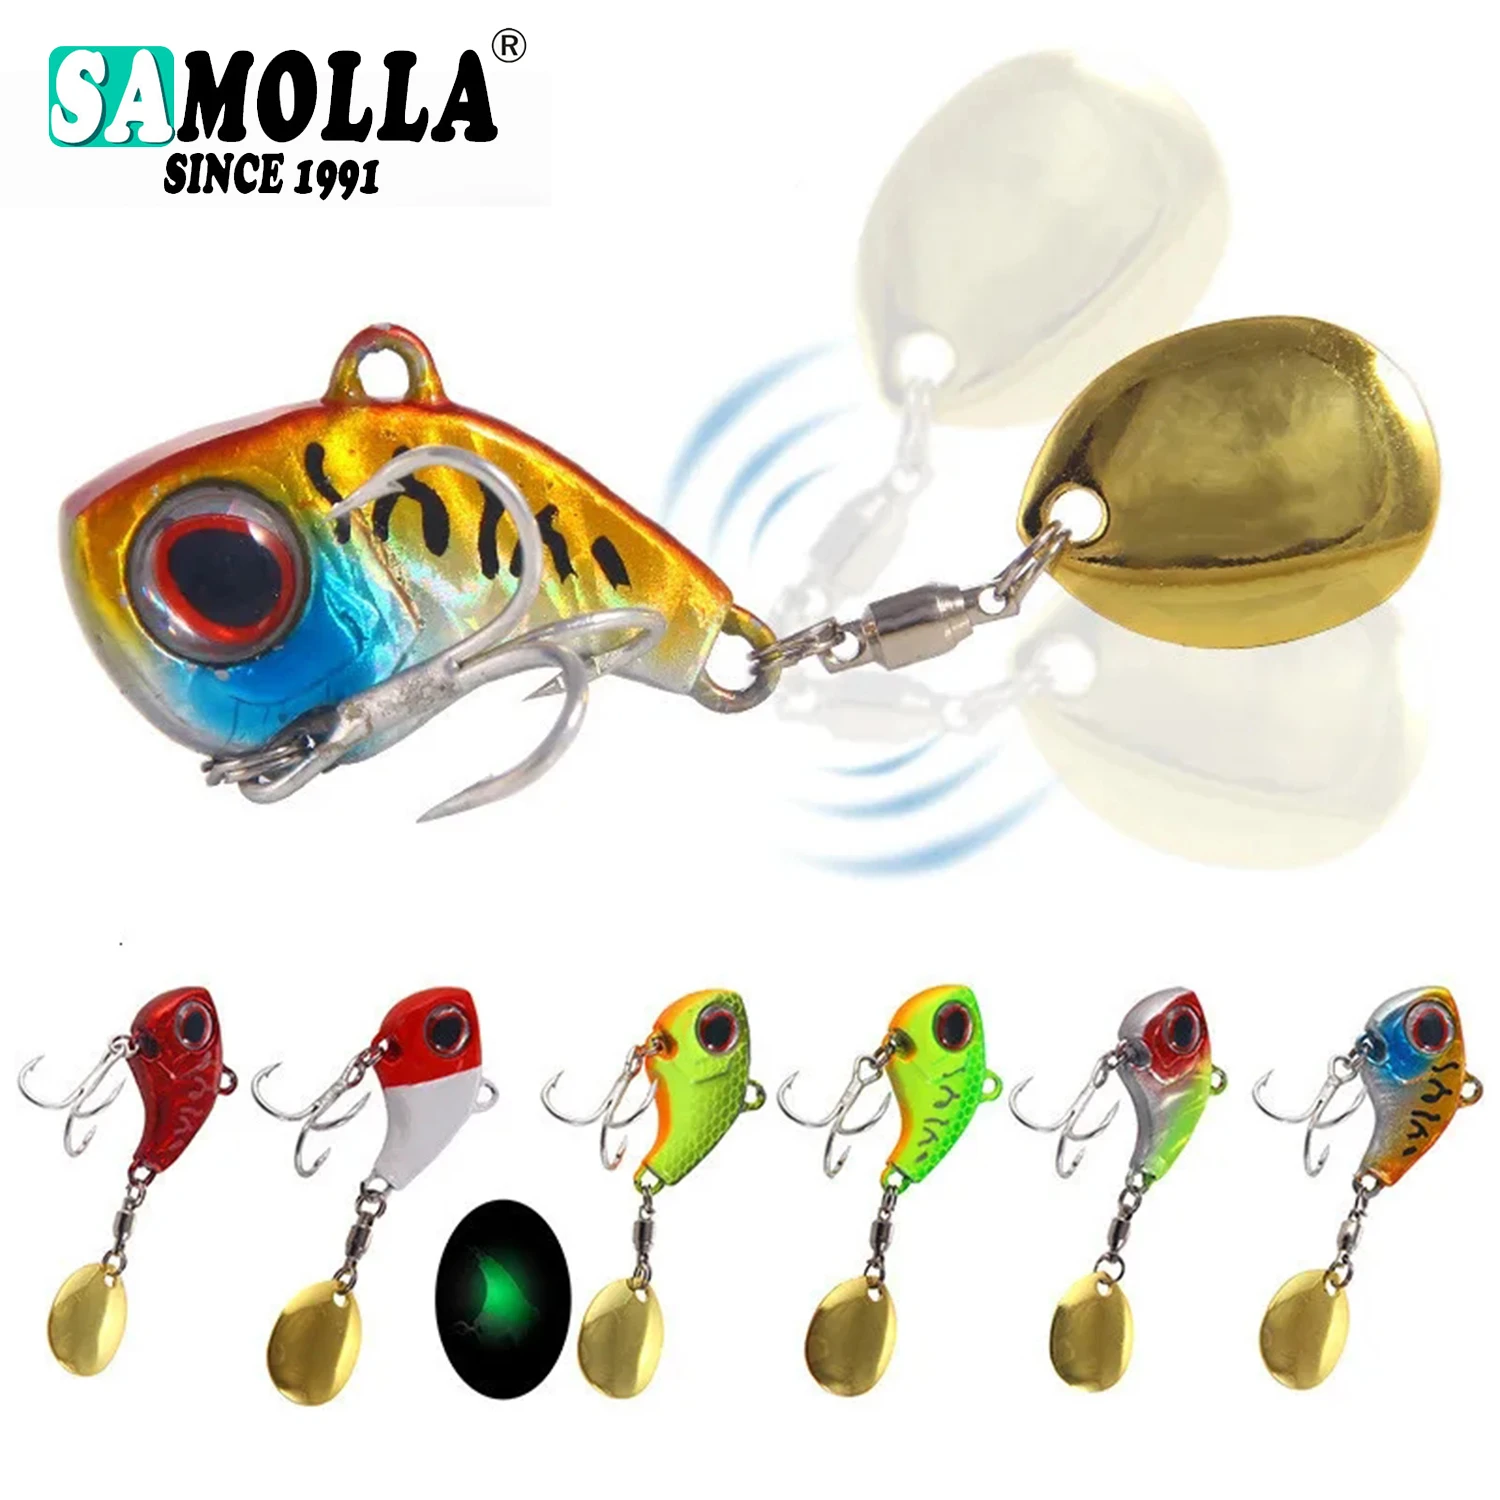 Vibration Fishing Lure Weights 9-22g Metal Fish Bait Whopper Fishing Bait Spinner Bait Articulos De Pesca Tackle Isca Artificial